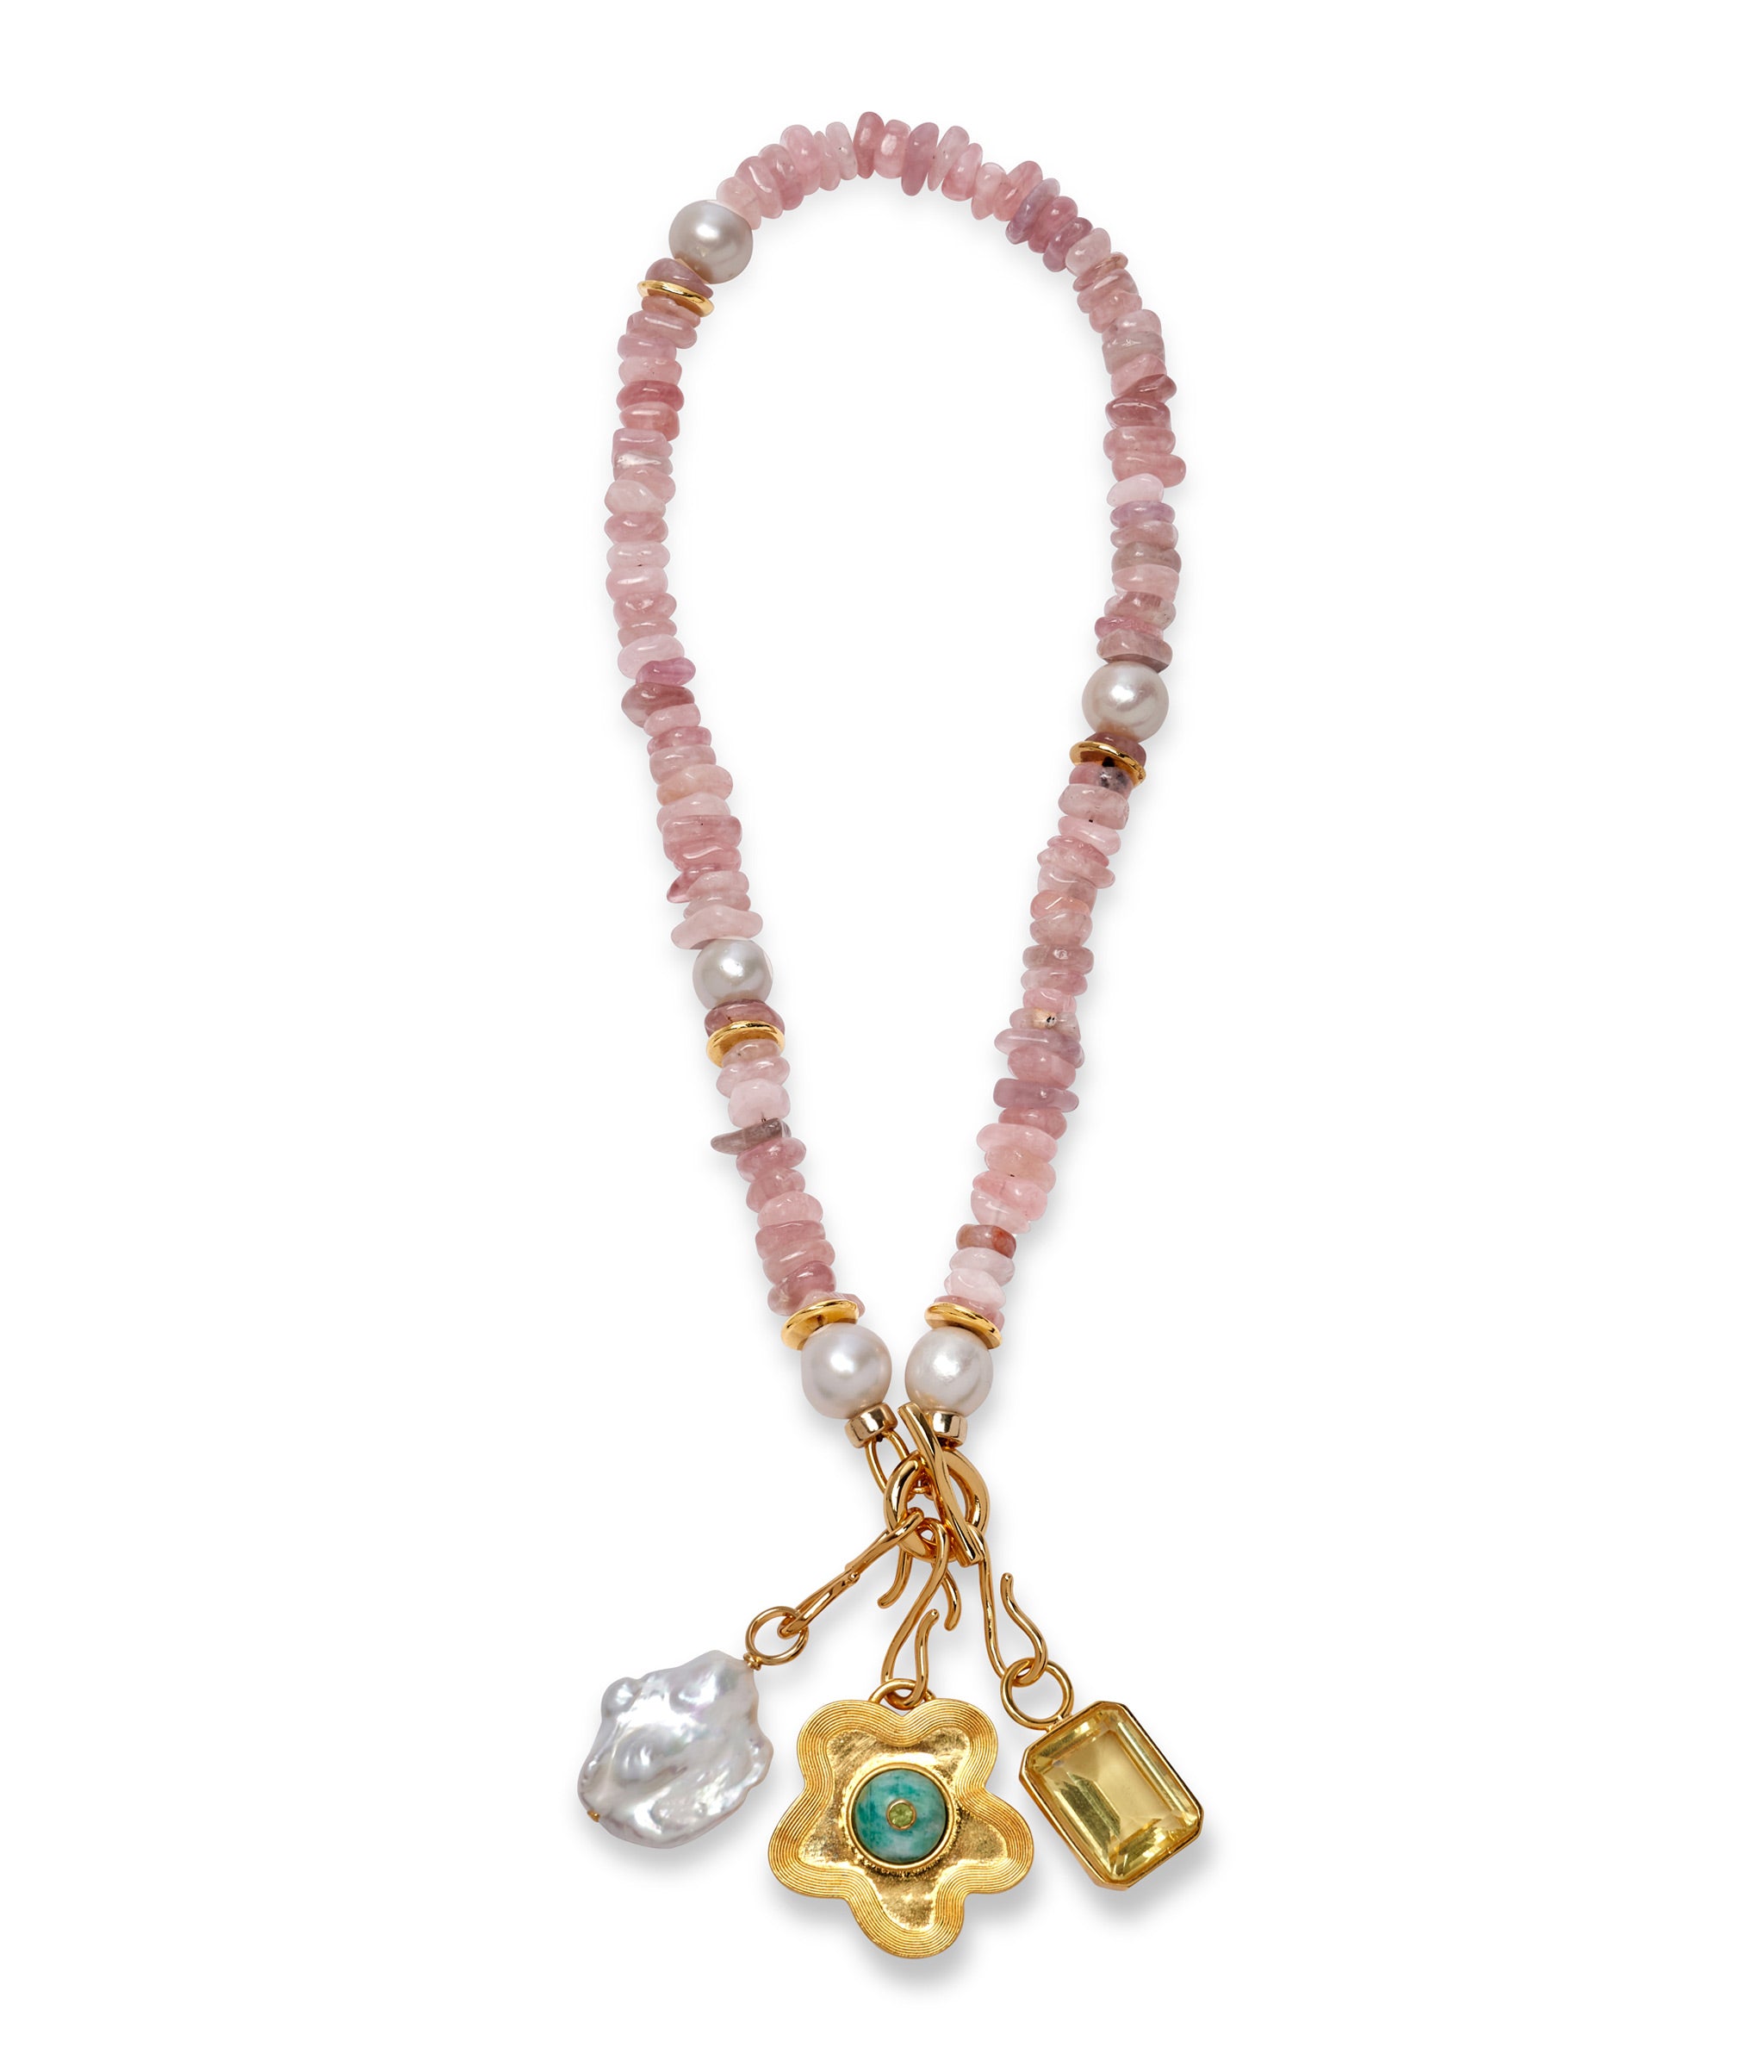 Mood Necklace in Strawberry Quartz with Candyland Charm in Lemon, Nana Pendant in Sea Star, and Deep Dive Charm.